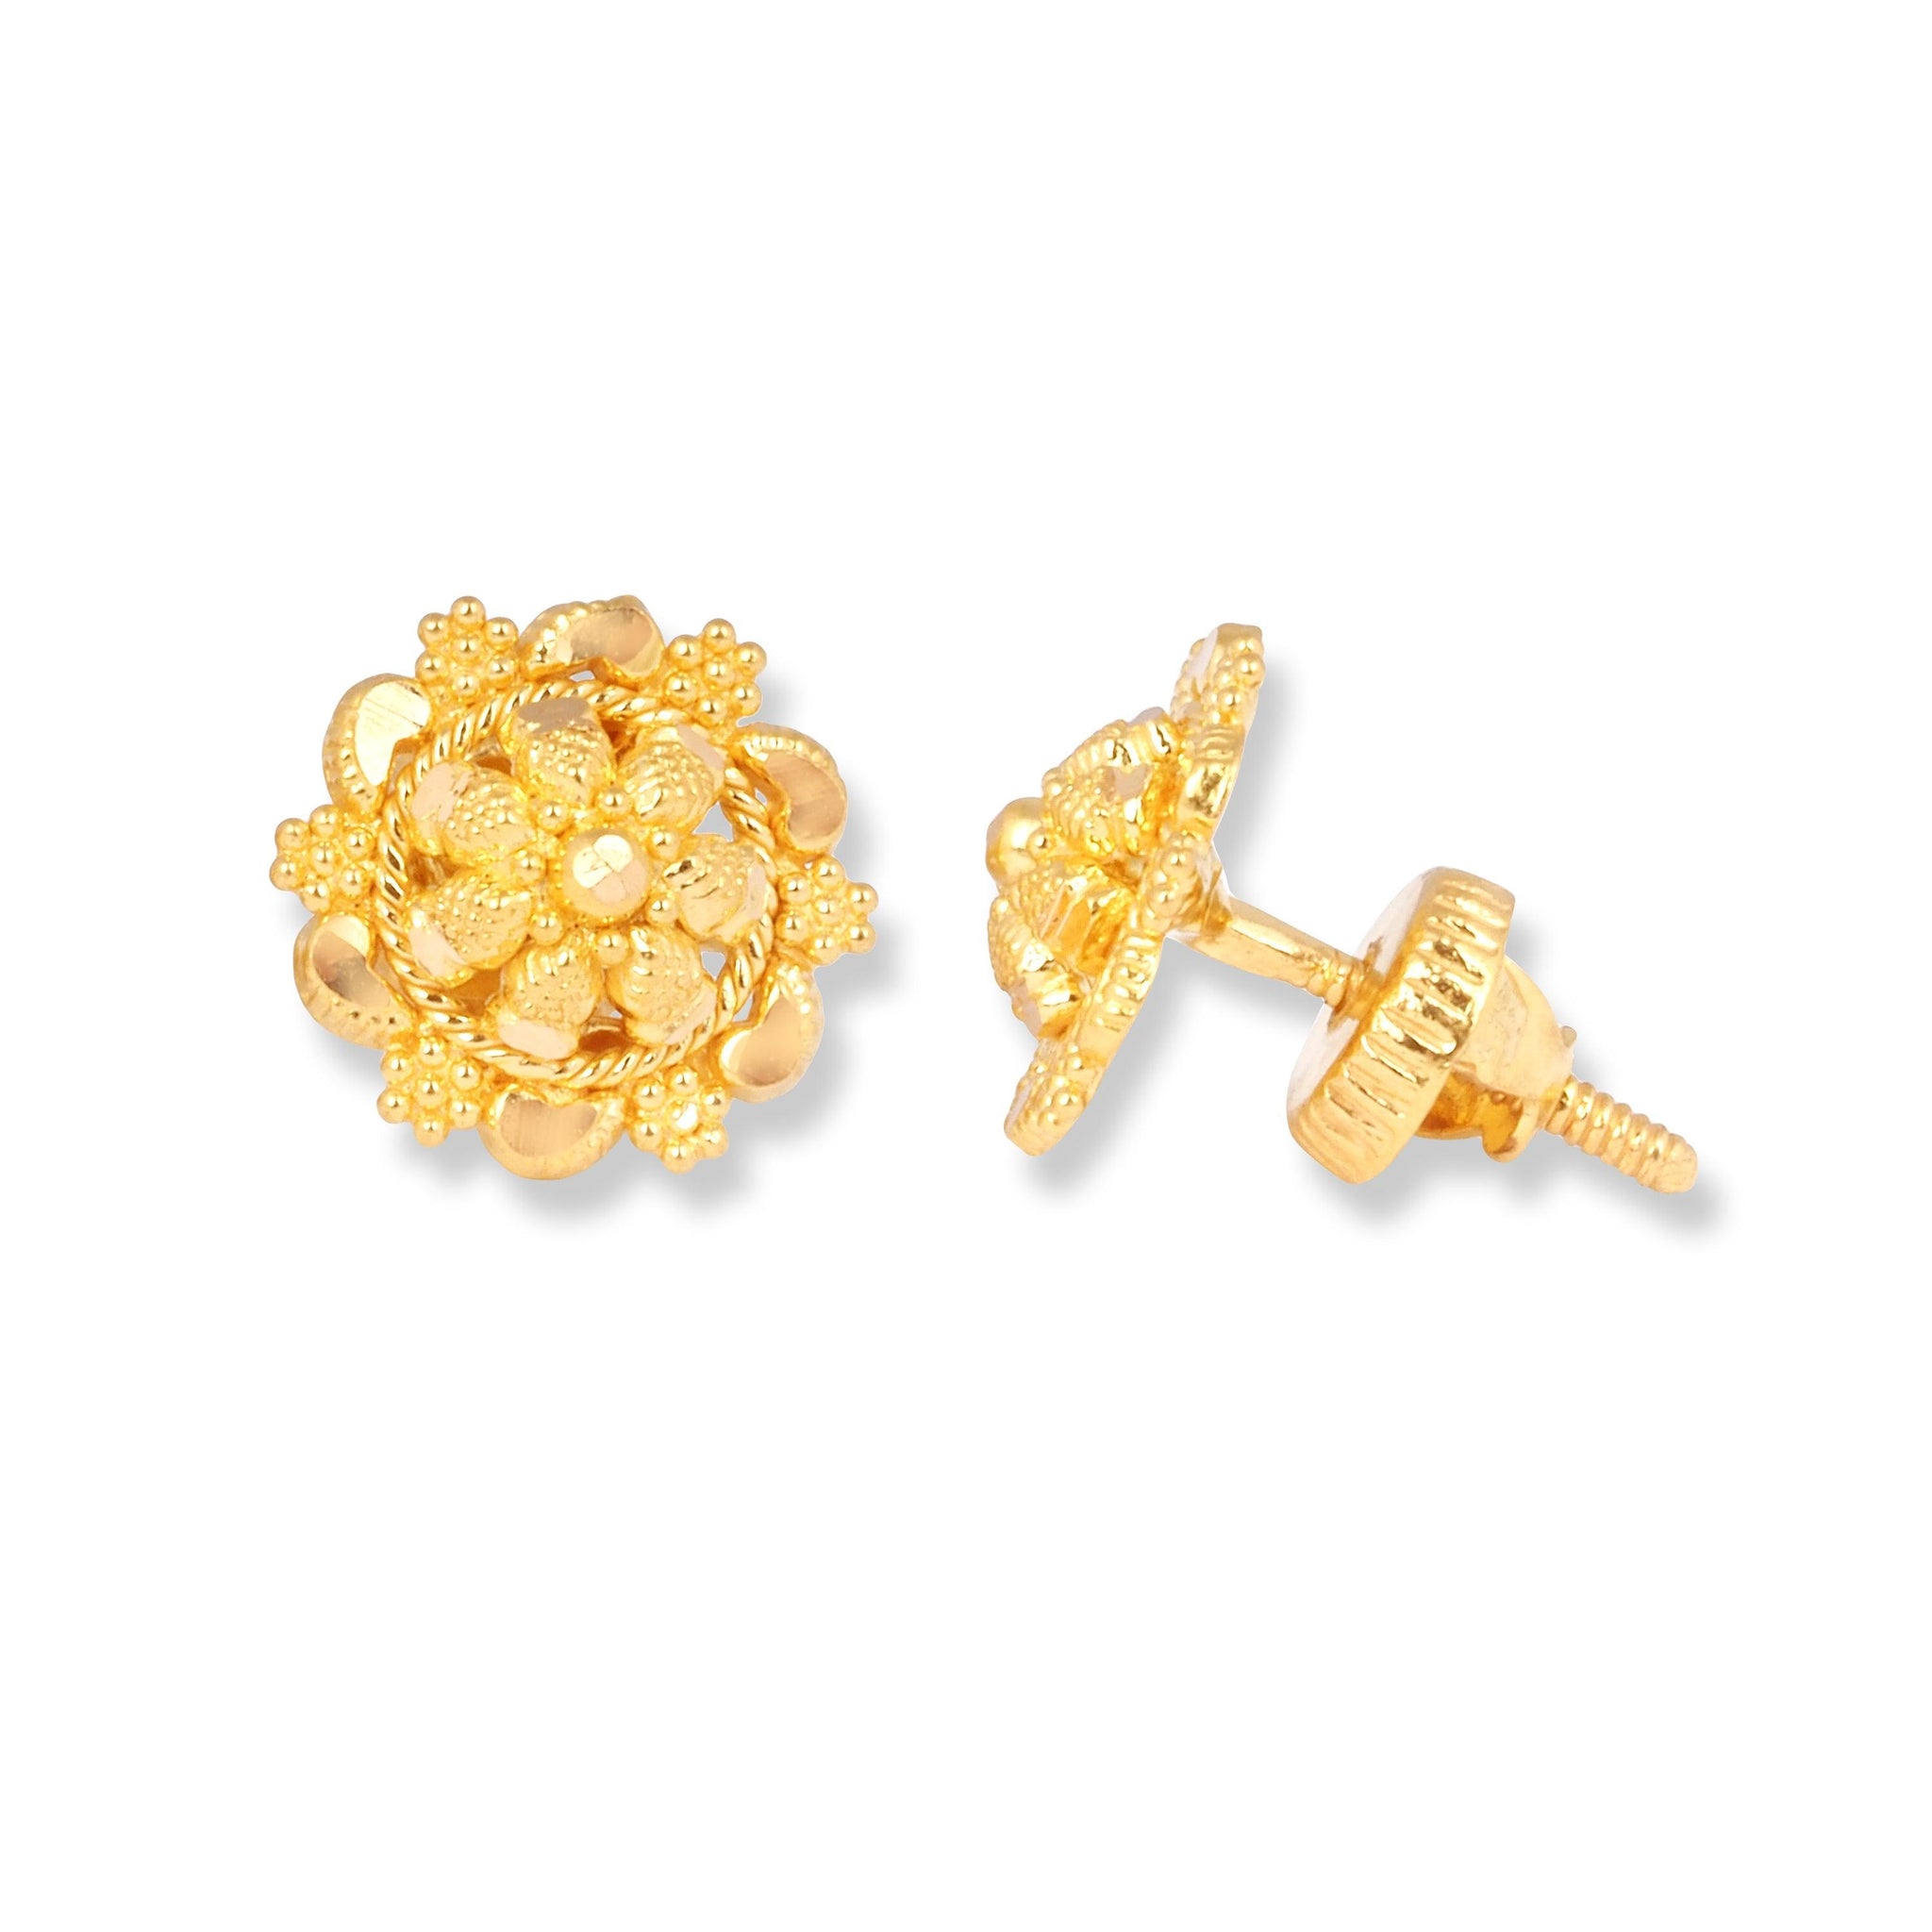 22ct Gold Earrings with Filigree Design (3.5g) E-7887